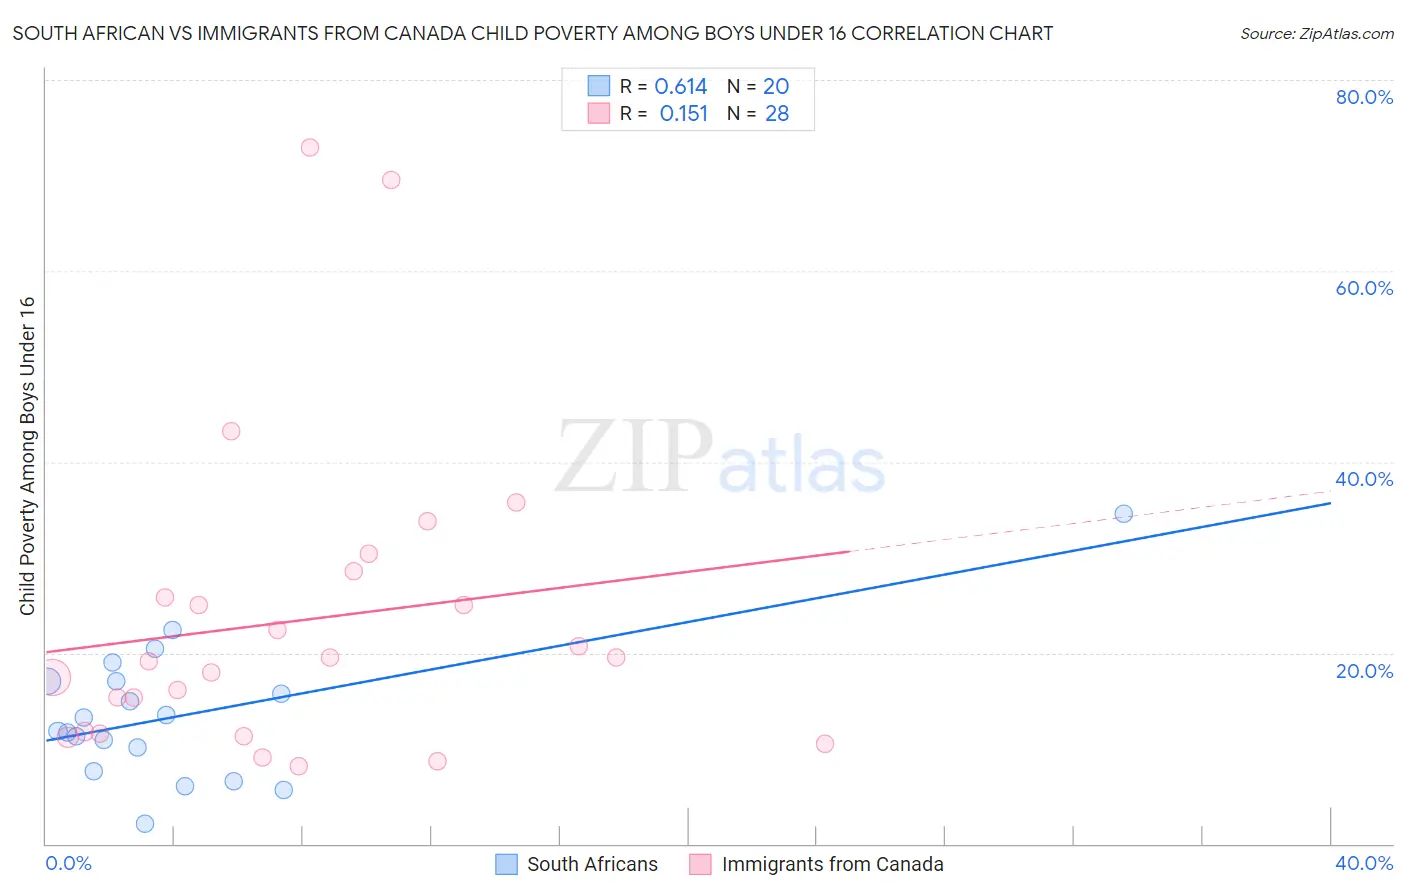 South African vs Immigrants from Canada Child Poverty Among Boys Under 16